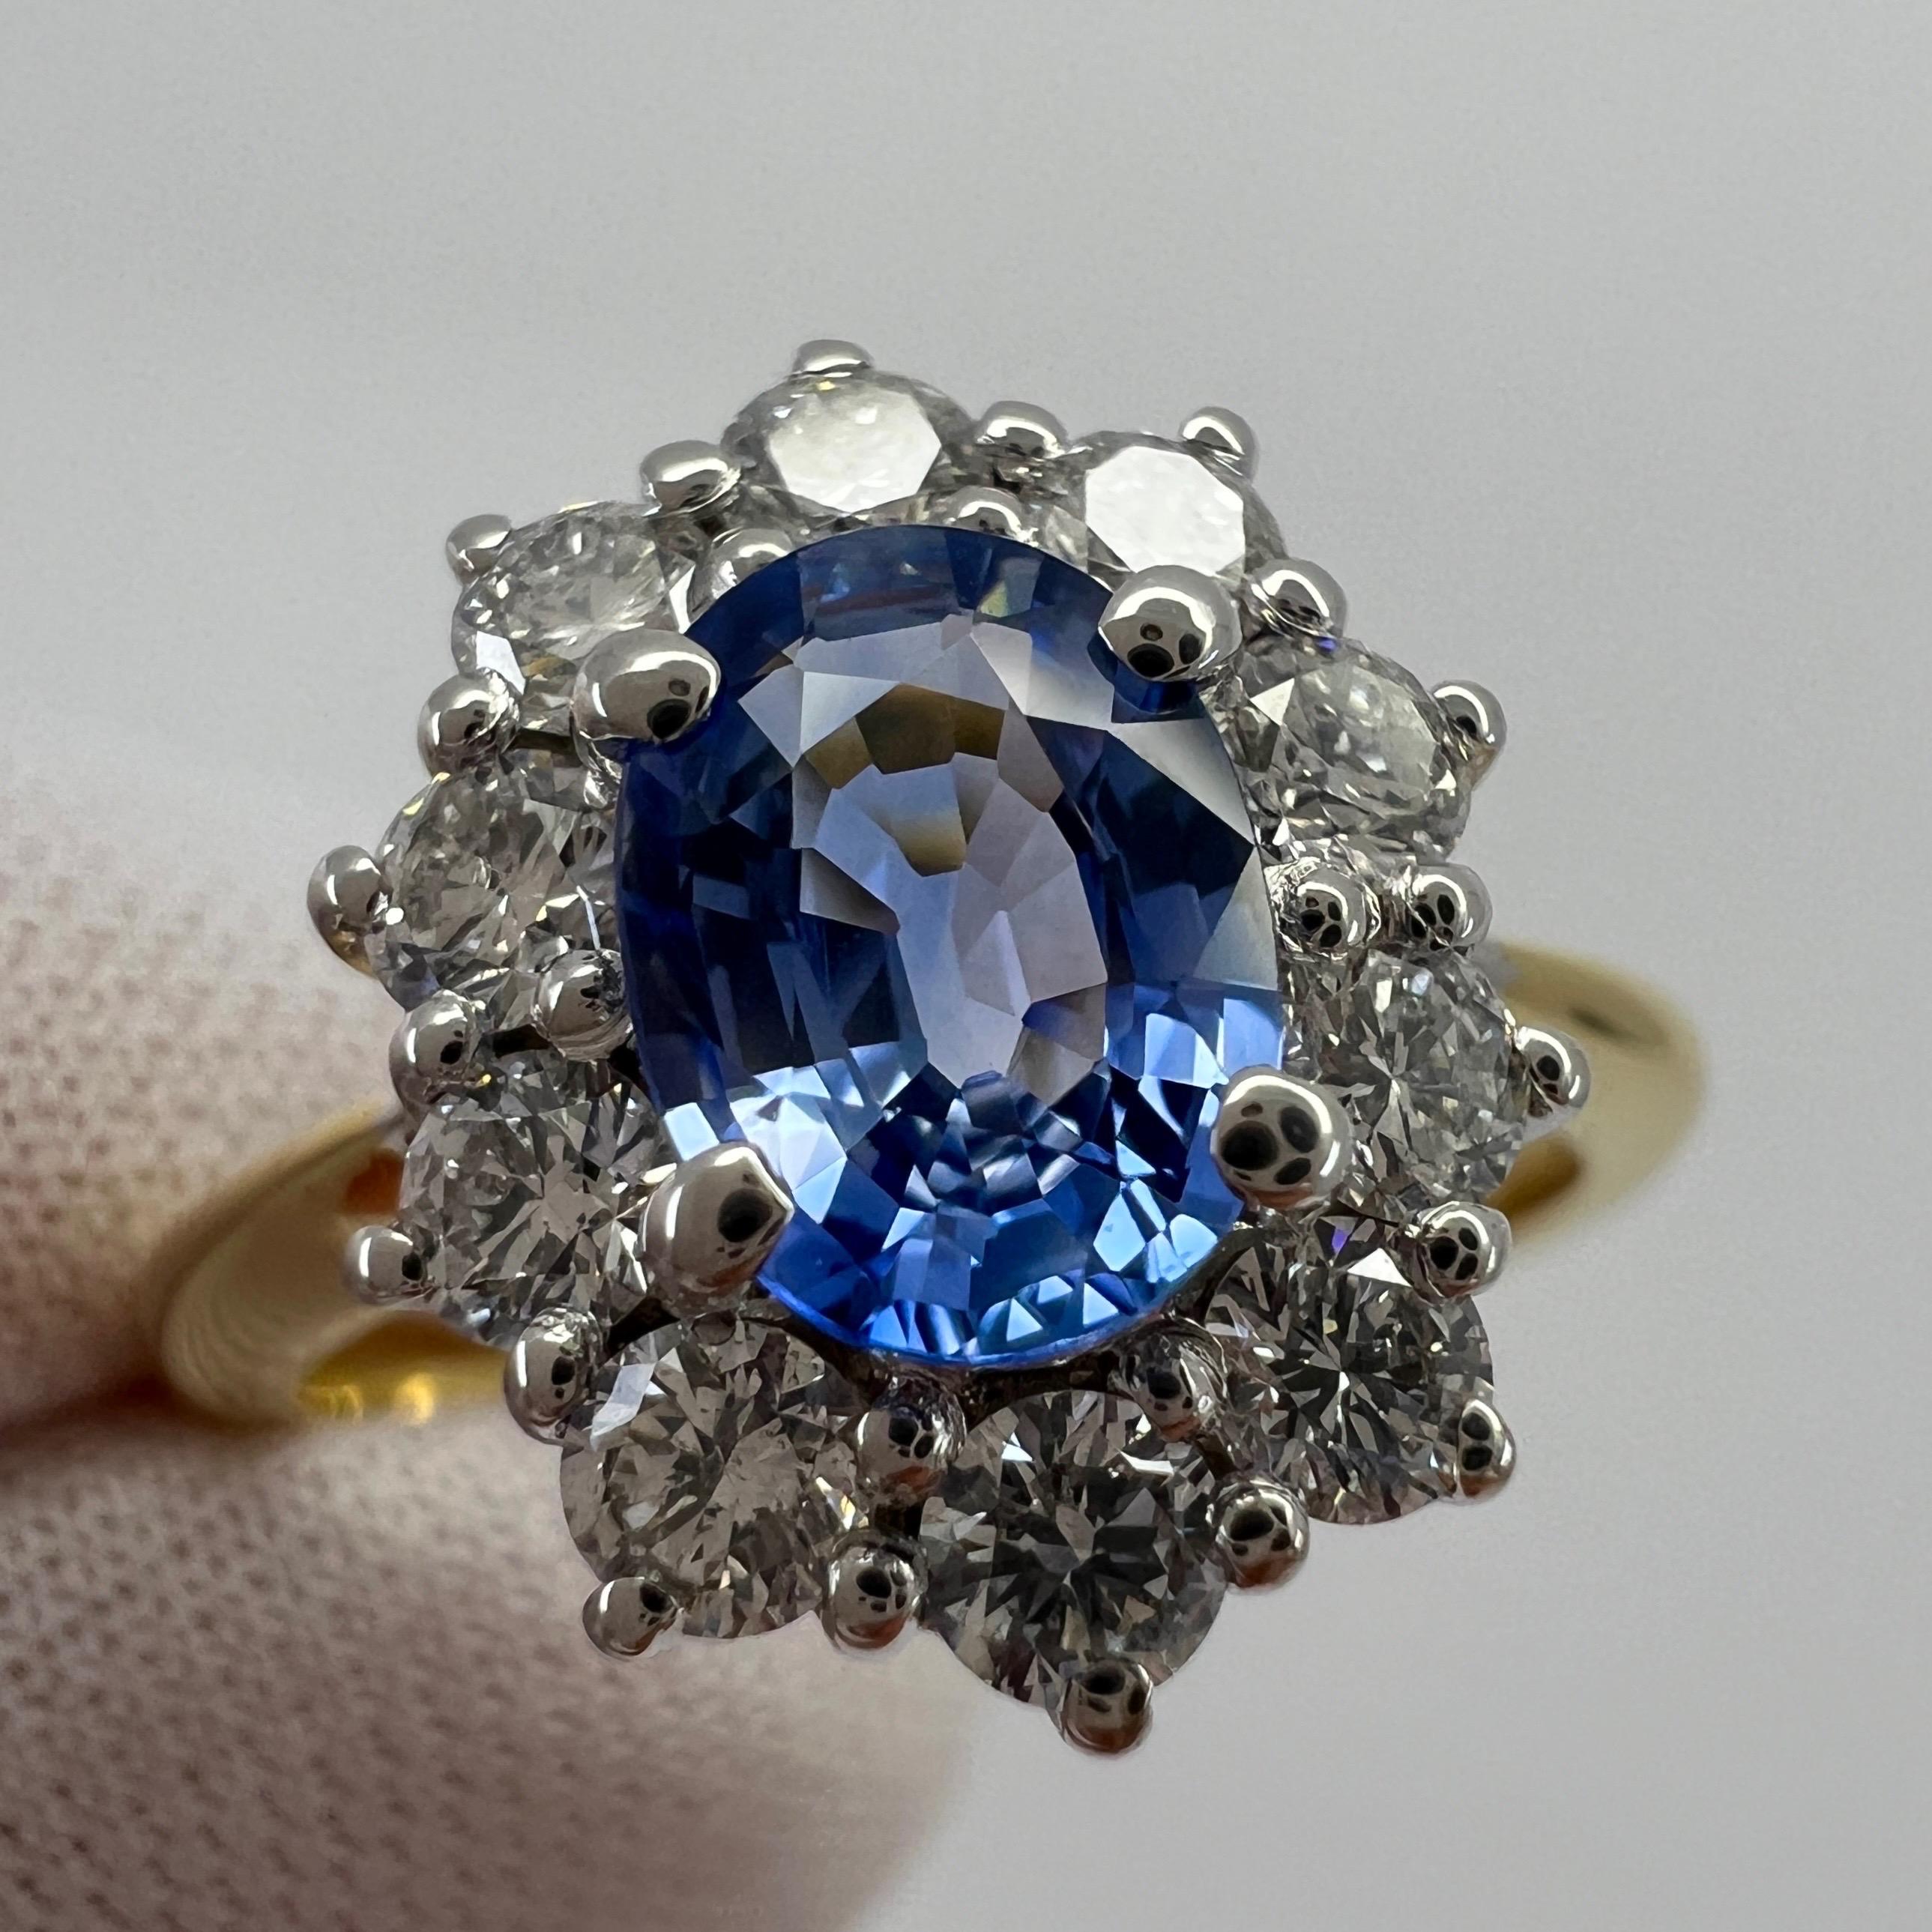 Fine Vivid Blue Oval Cut Ceylon Sapphire & Diamond 18k Gold Cluster Ring 1.62 Total Carat.

Fine colour oval cut Ceylon blue sapphire centre stone. 1.00 carat measuring 7x5.2mm. Has excellent cut and clarity VVS.
Mined in Sri Lanka, source of some